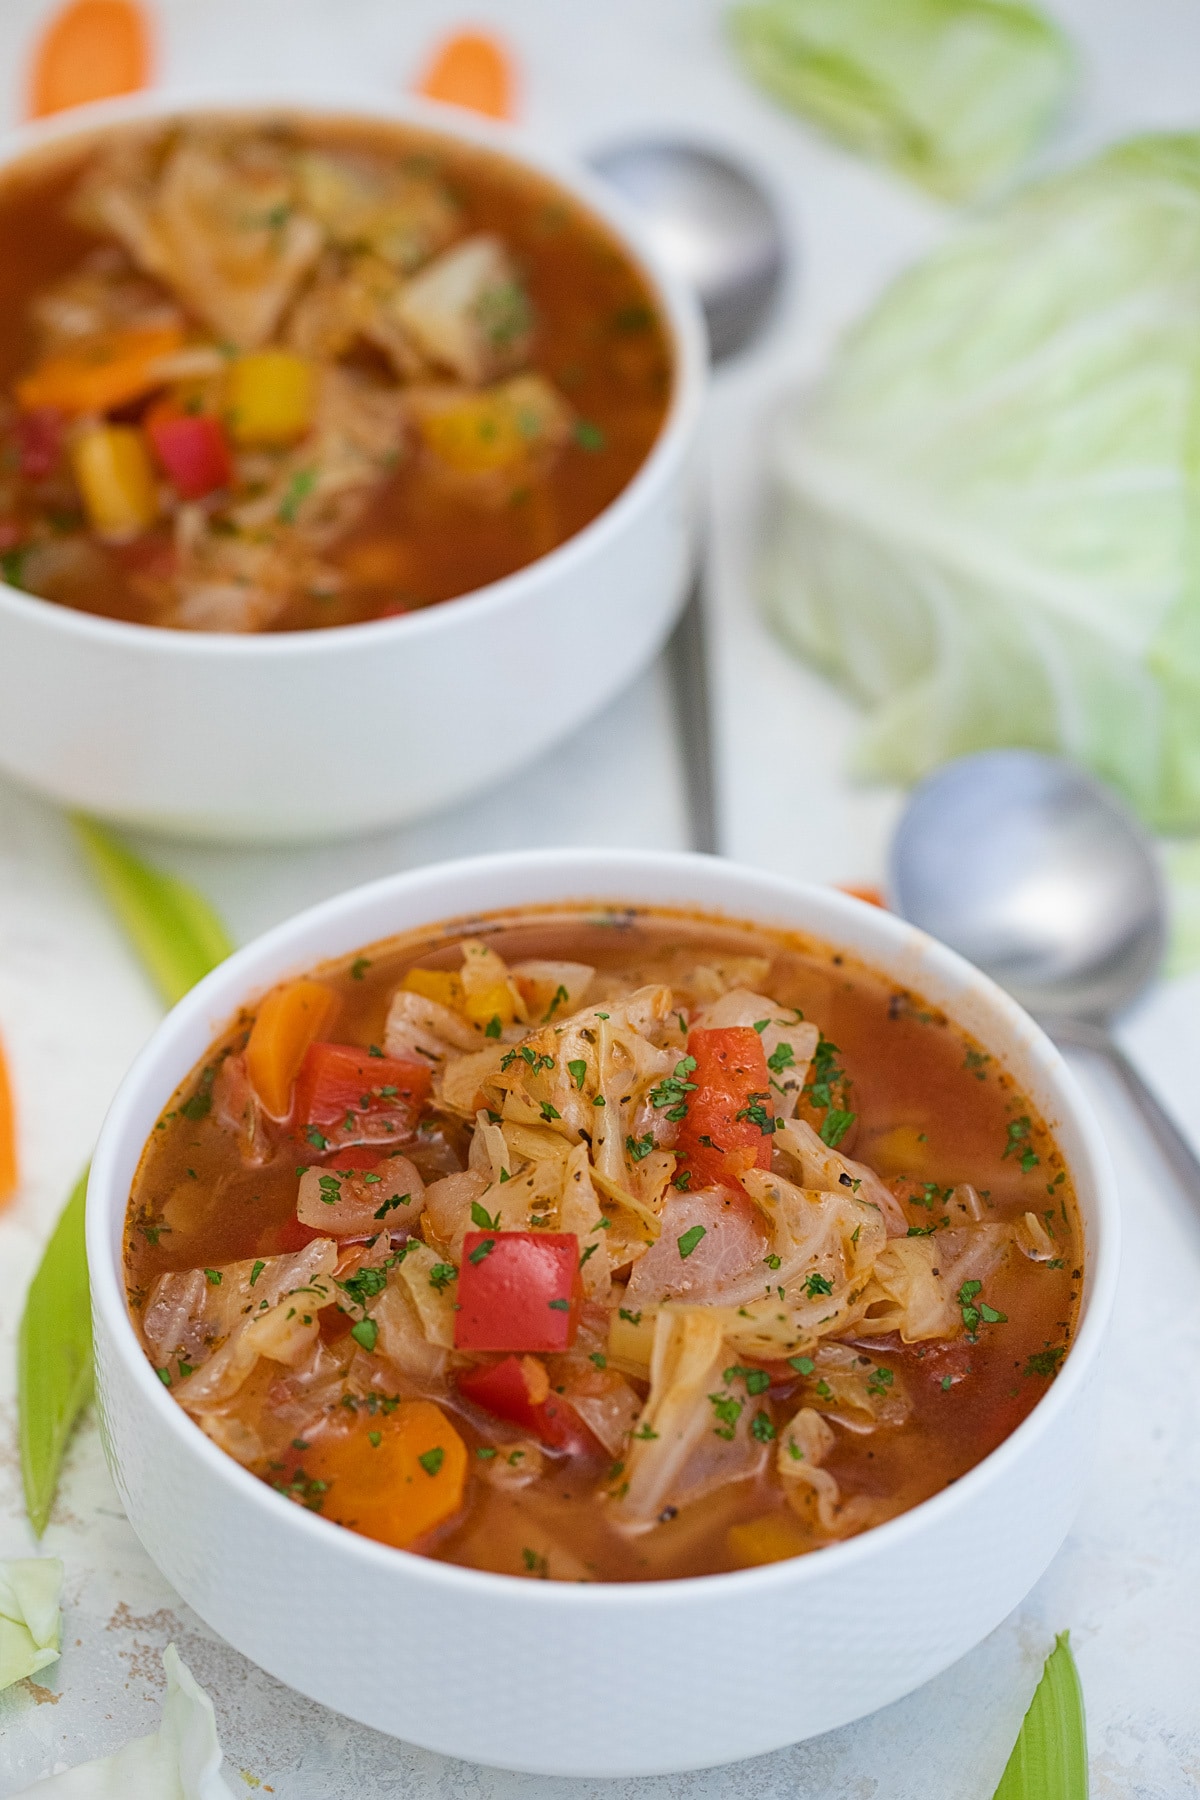 Bowls of vegetable soup